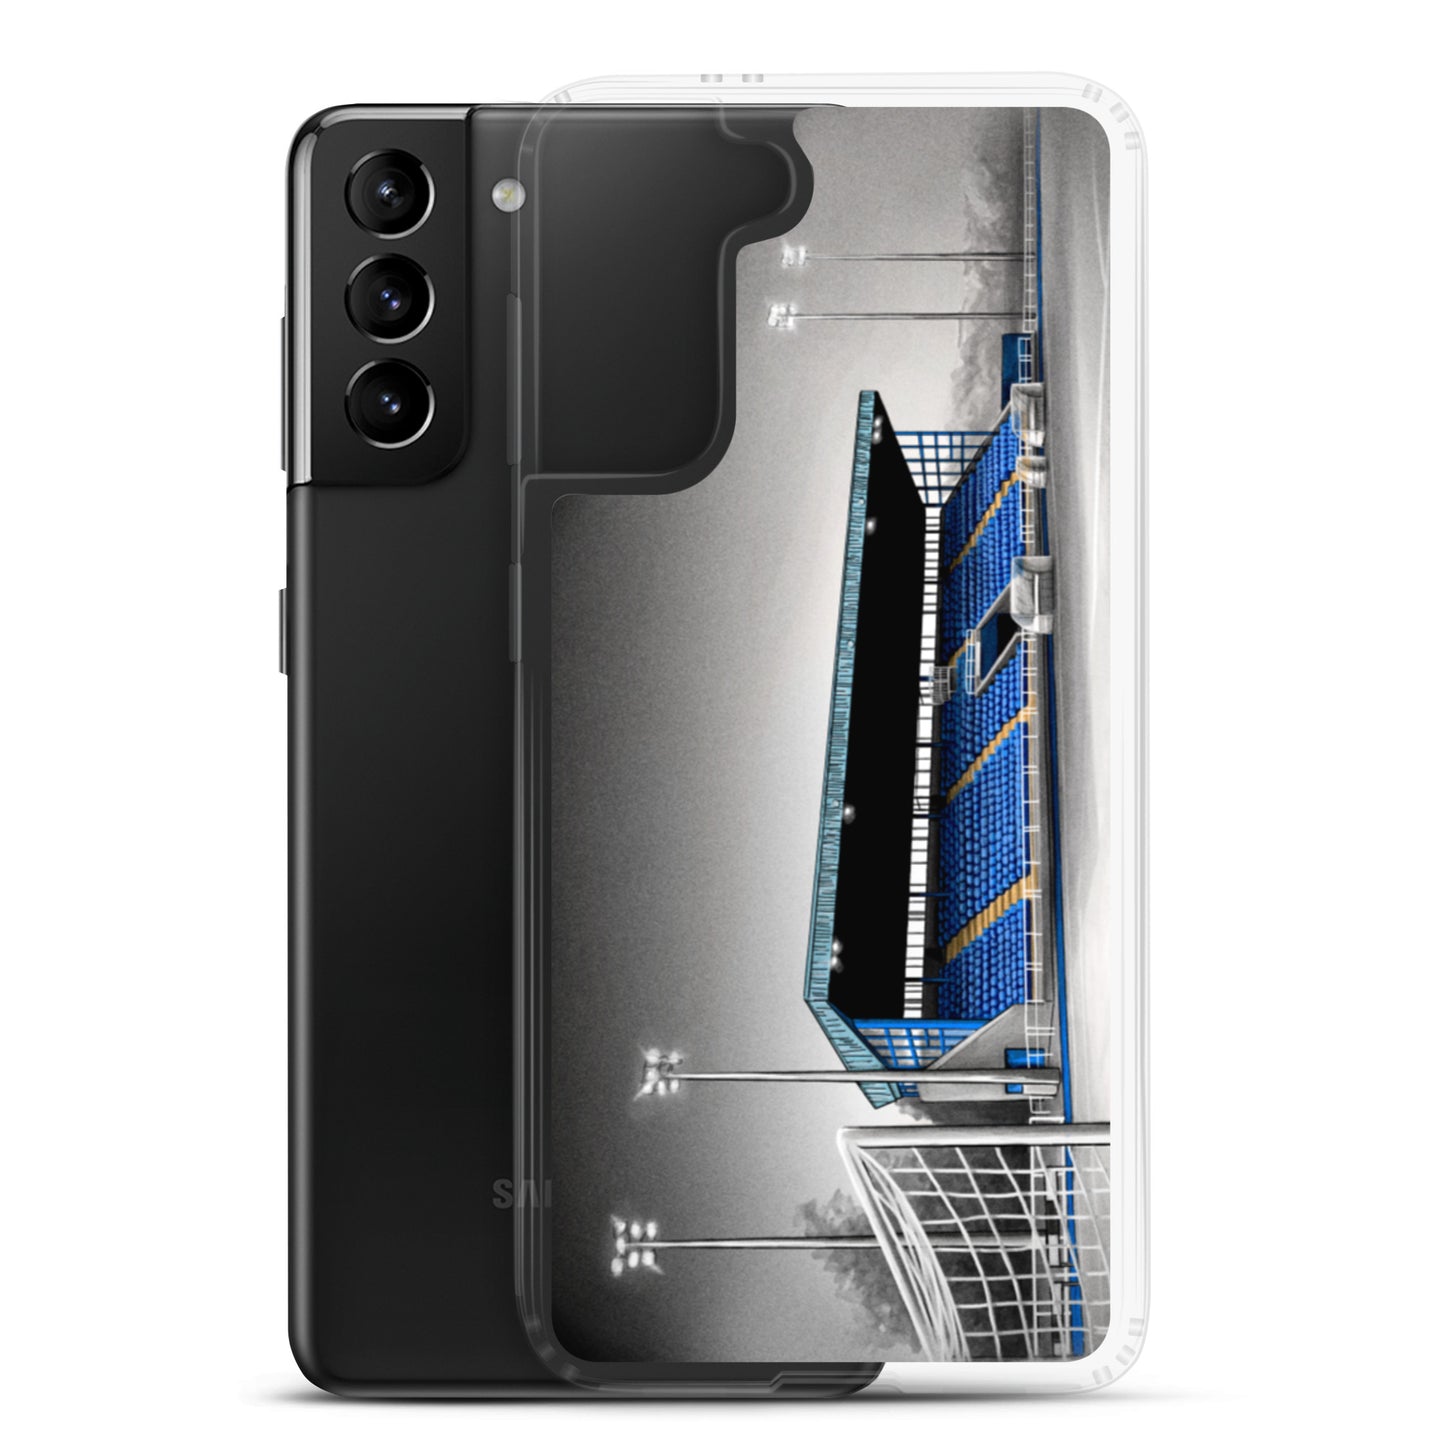 The RSC Waterford FC Samsung Case